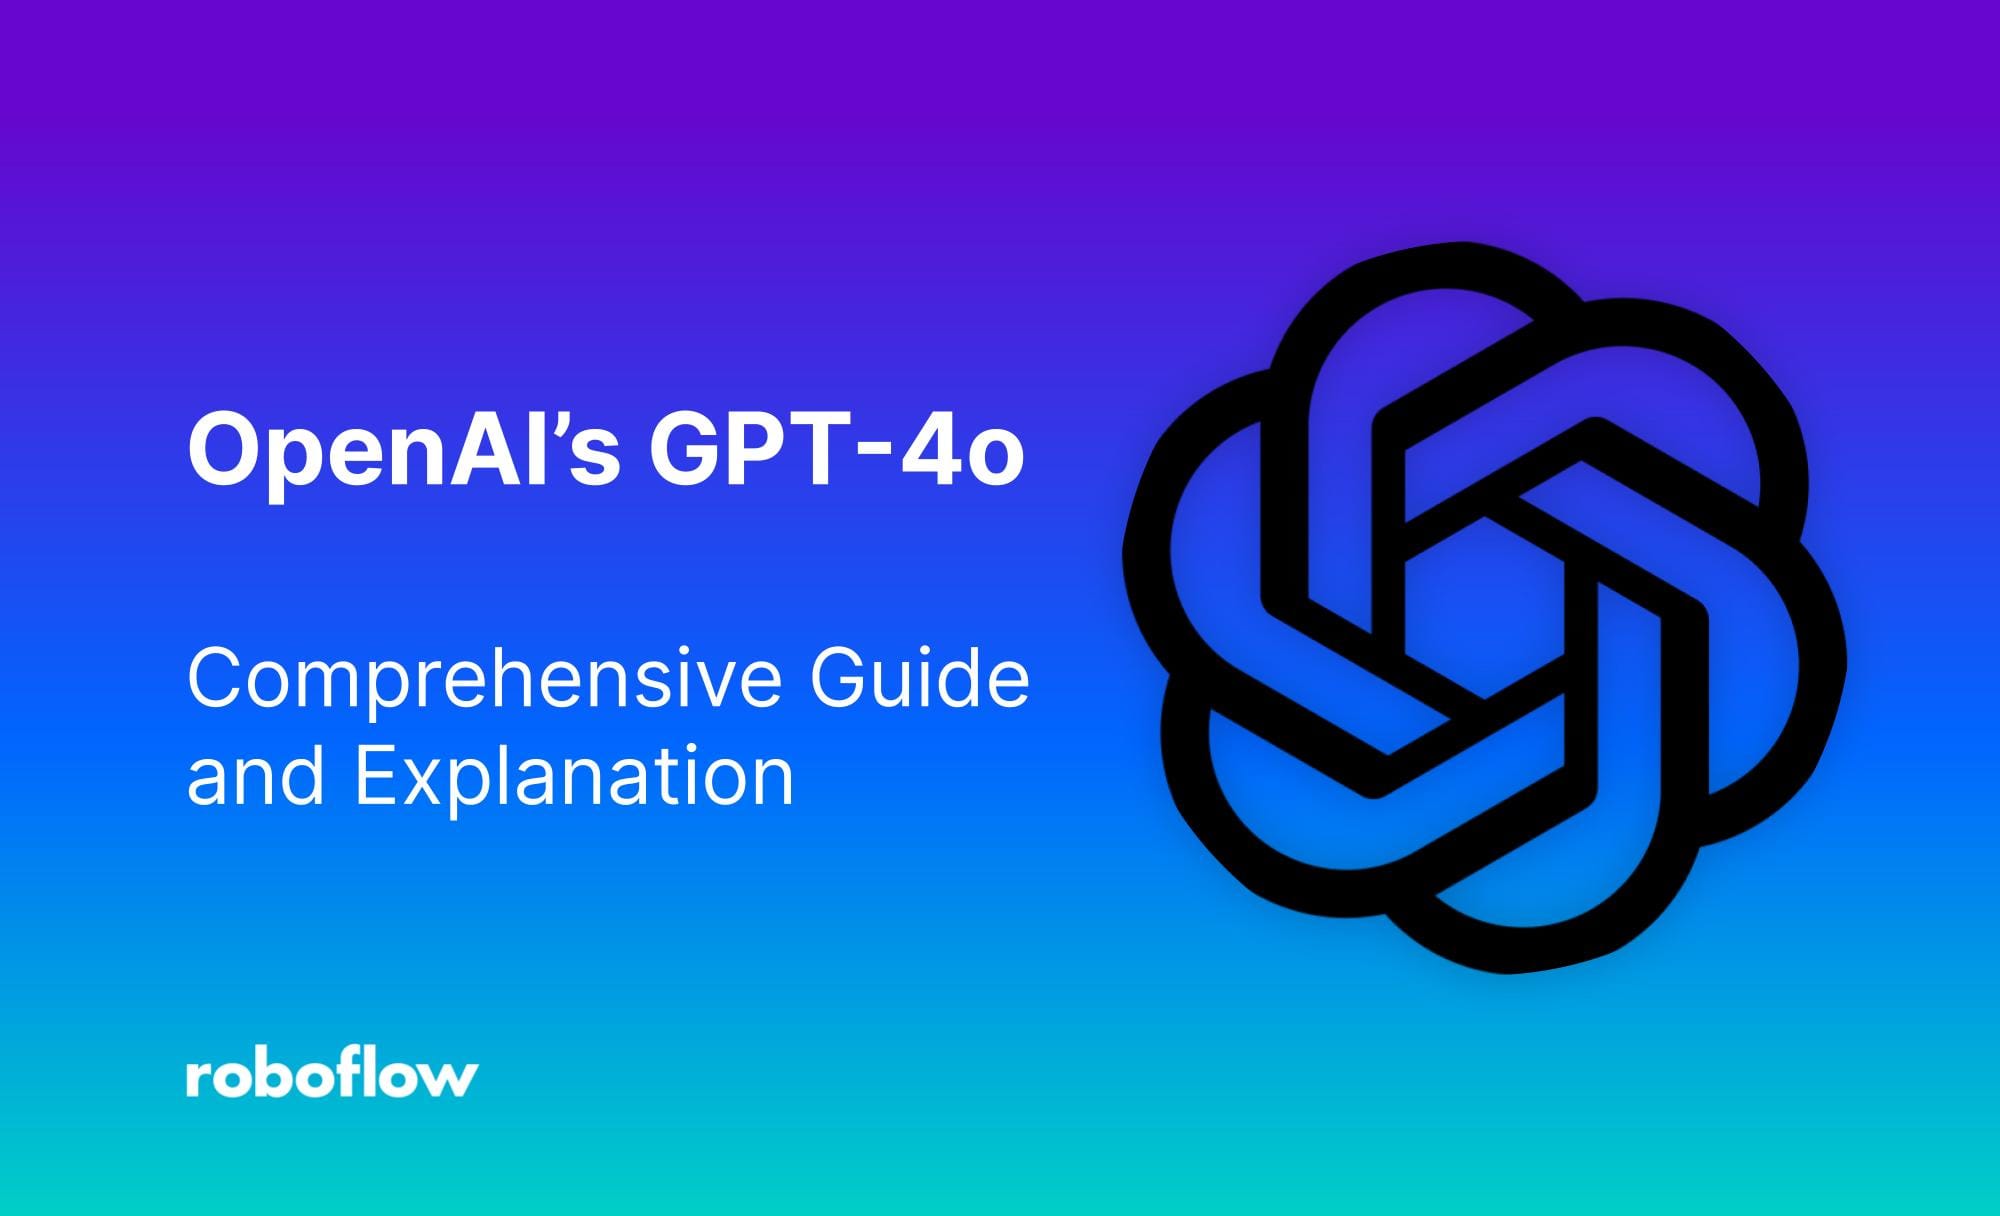 GPT-4o: The Comprehensive Guide and Explanation